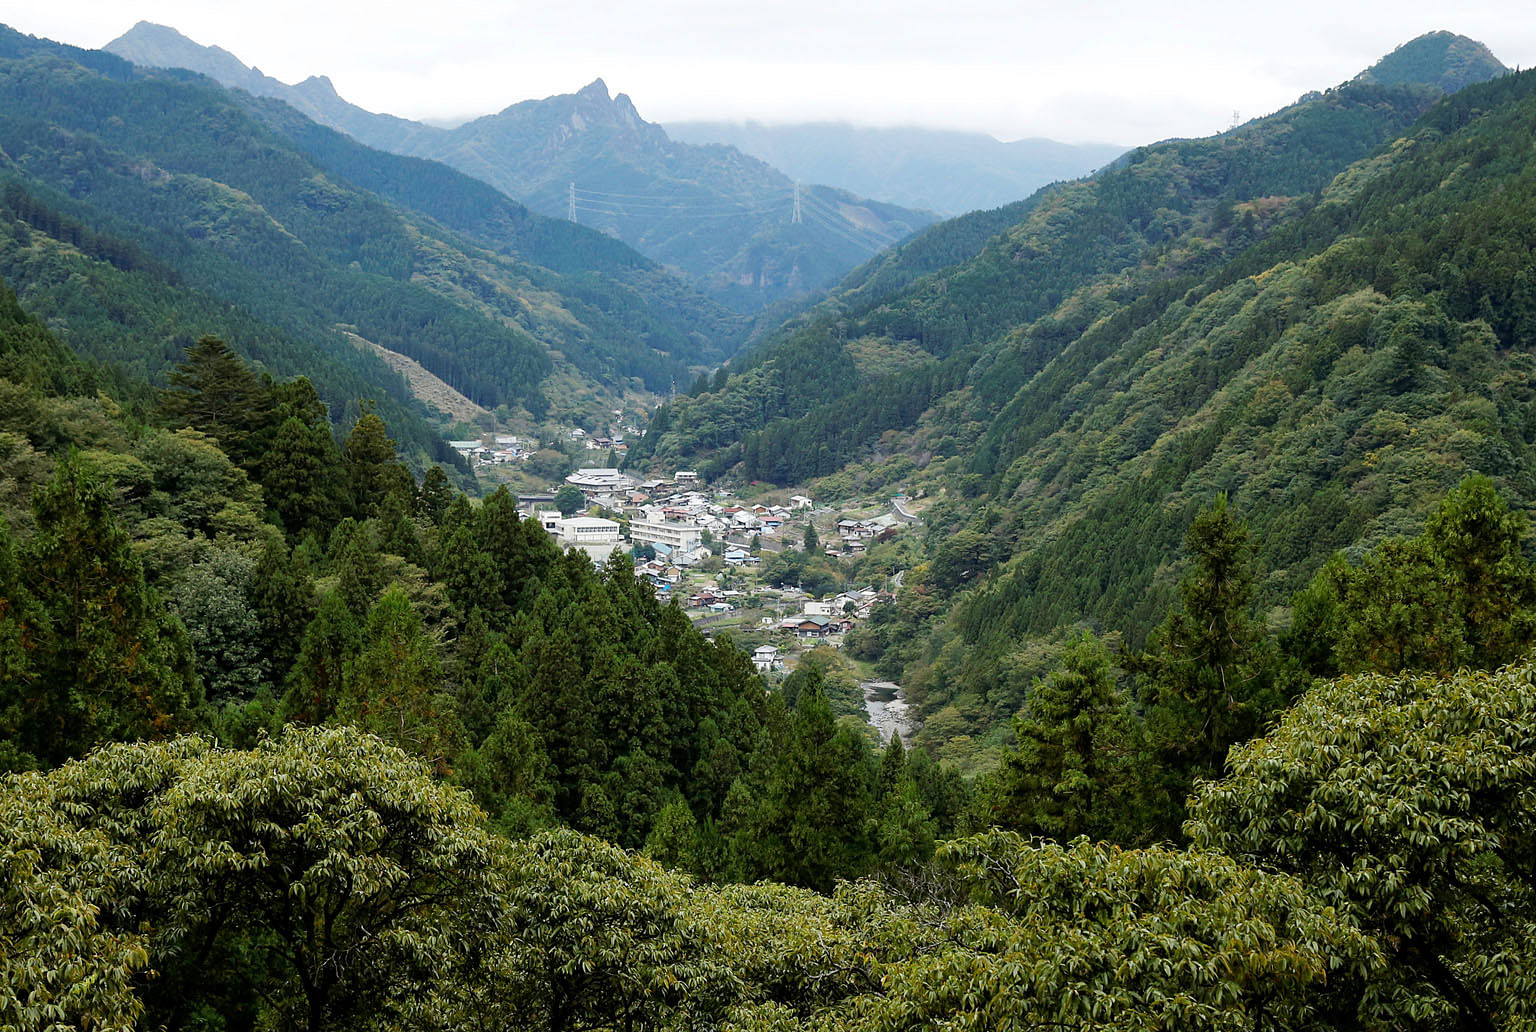 The hamlet of Nanmoku Village nestled between mountains in Gunma prefecture. In Japan, land that was once a feudal treasure is now so worthless that its owners are running away.